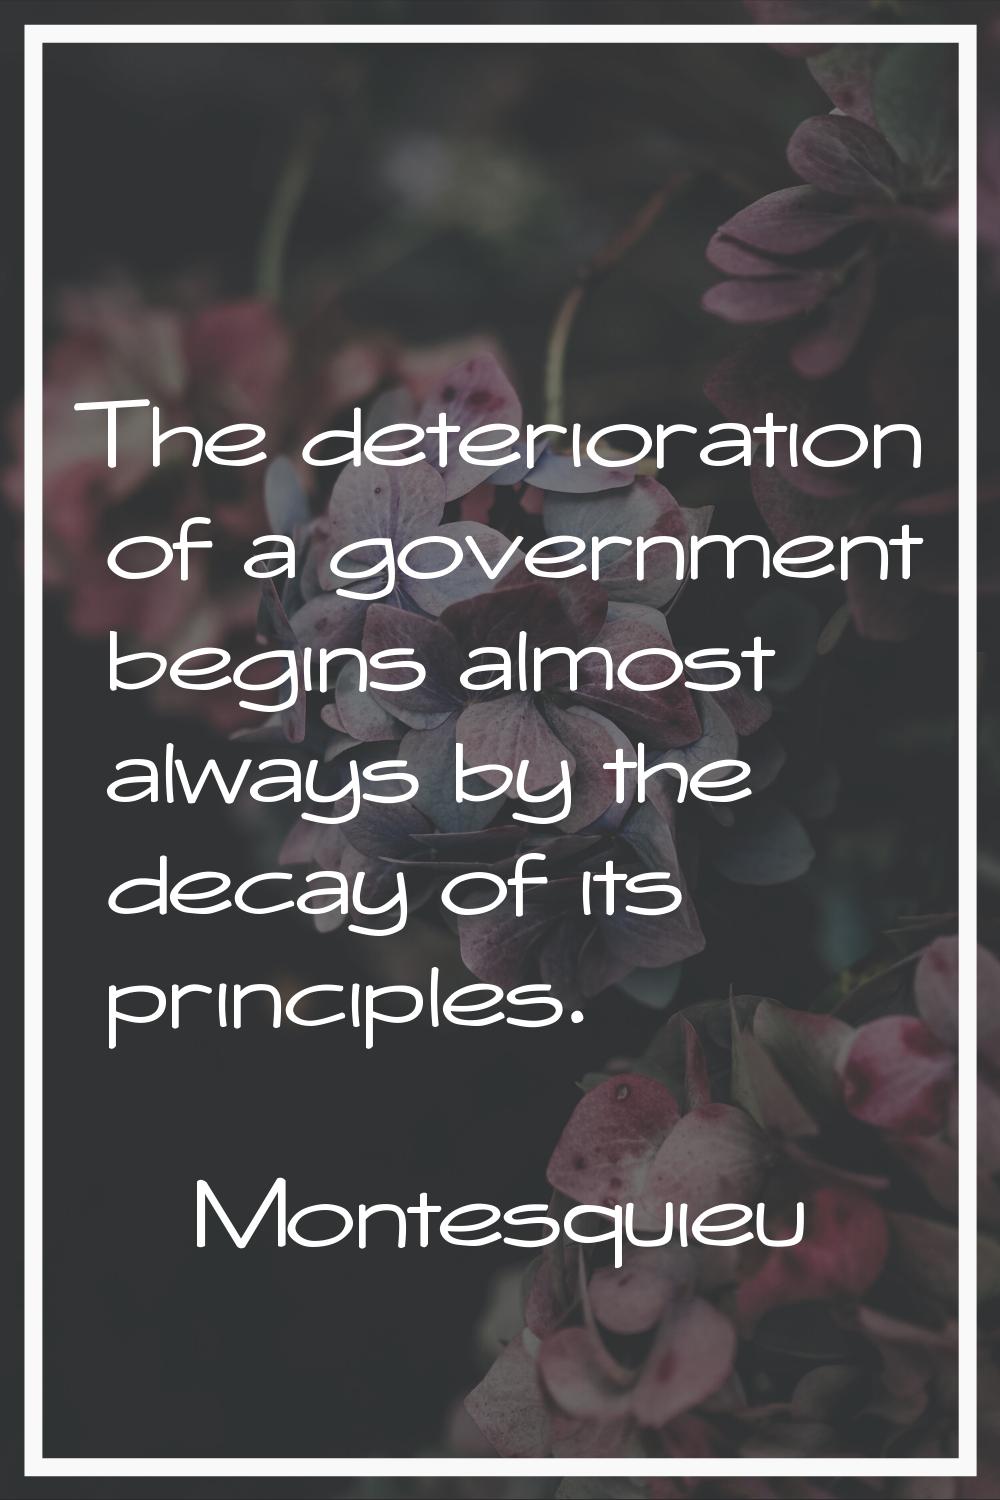 The deterioration of a government begins almost always by the decay of its principles.